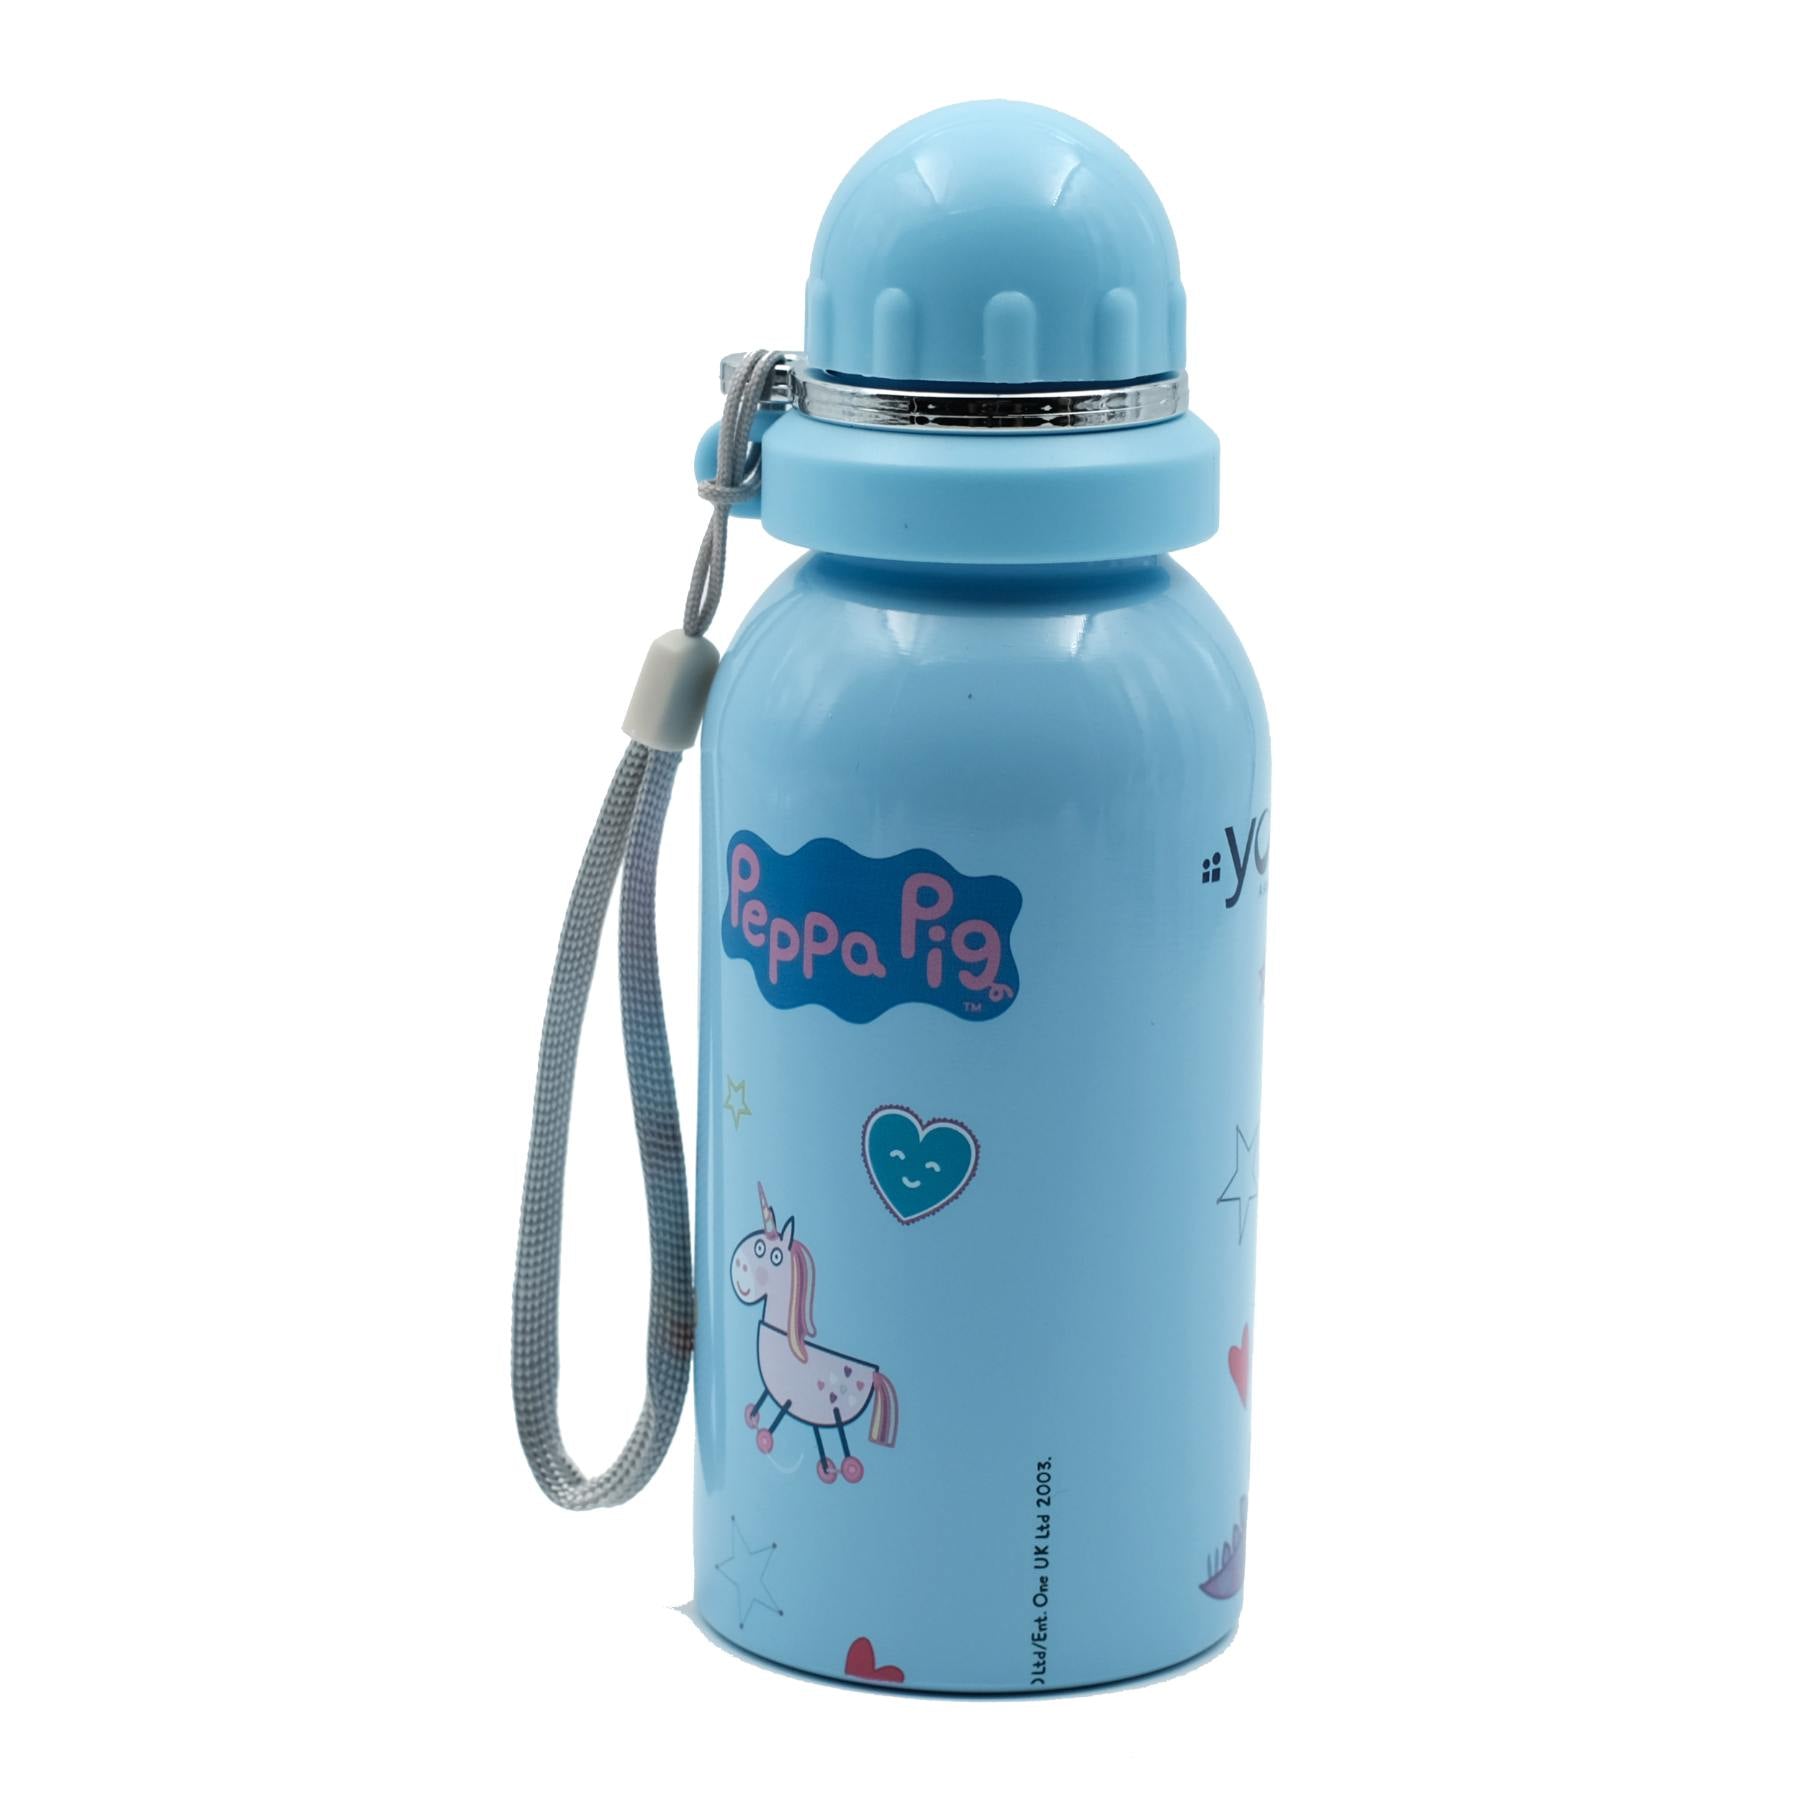 Youp Stainless Steel Blue Color Peppa Pig Kids Water Bottle HYBRID - 500 Ml